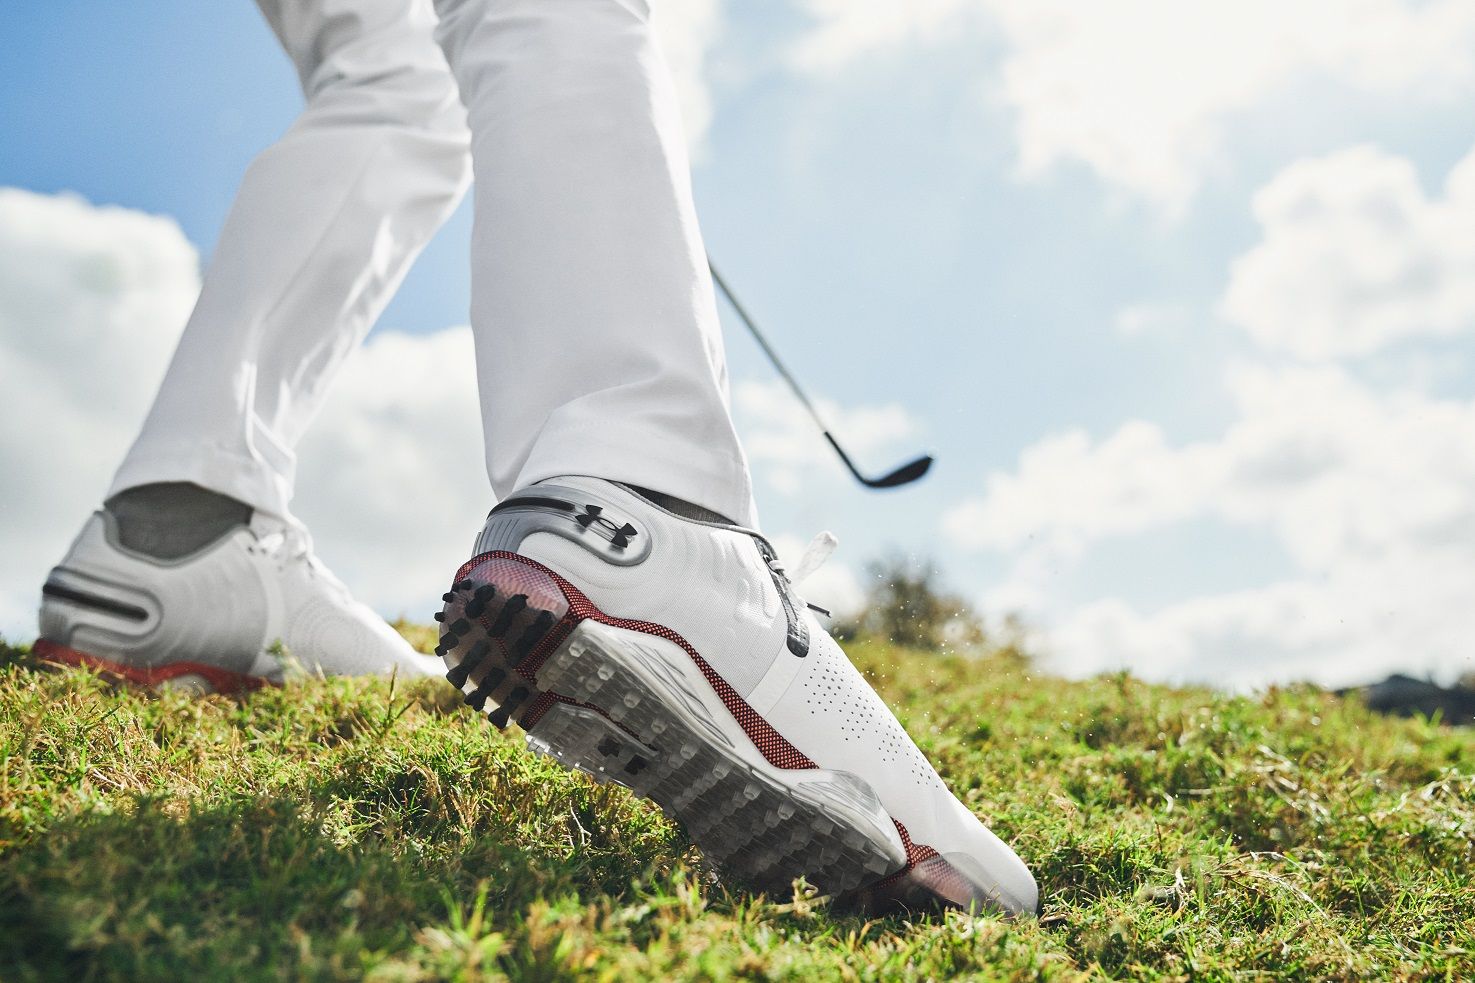 NEW: Under Armour Spieth 5 Shoes